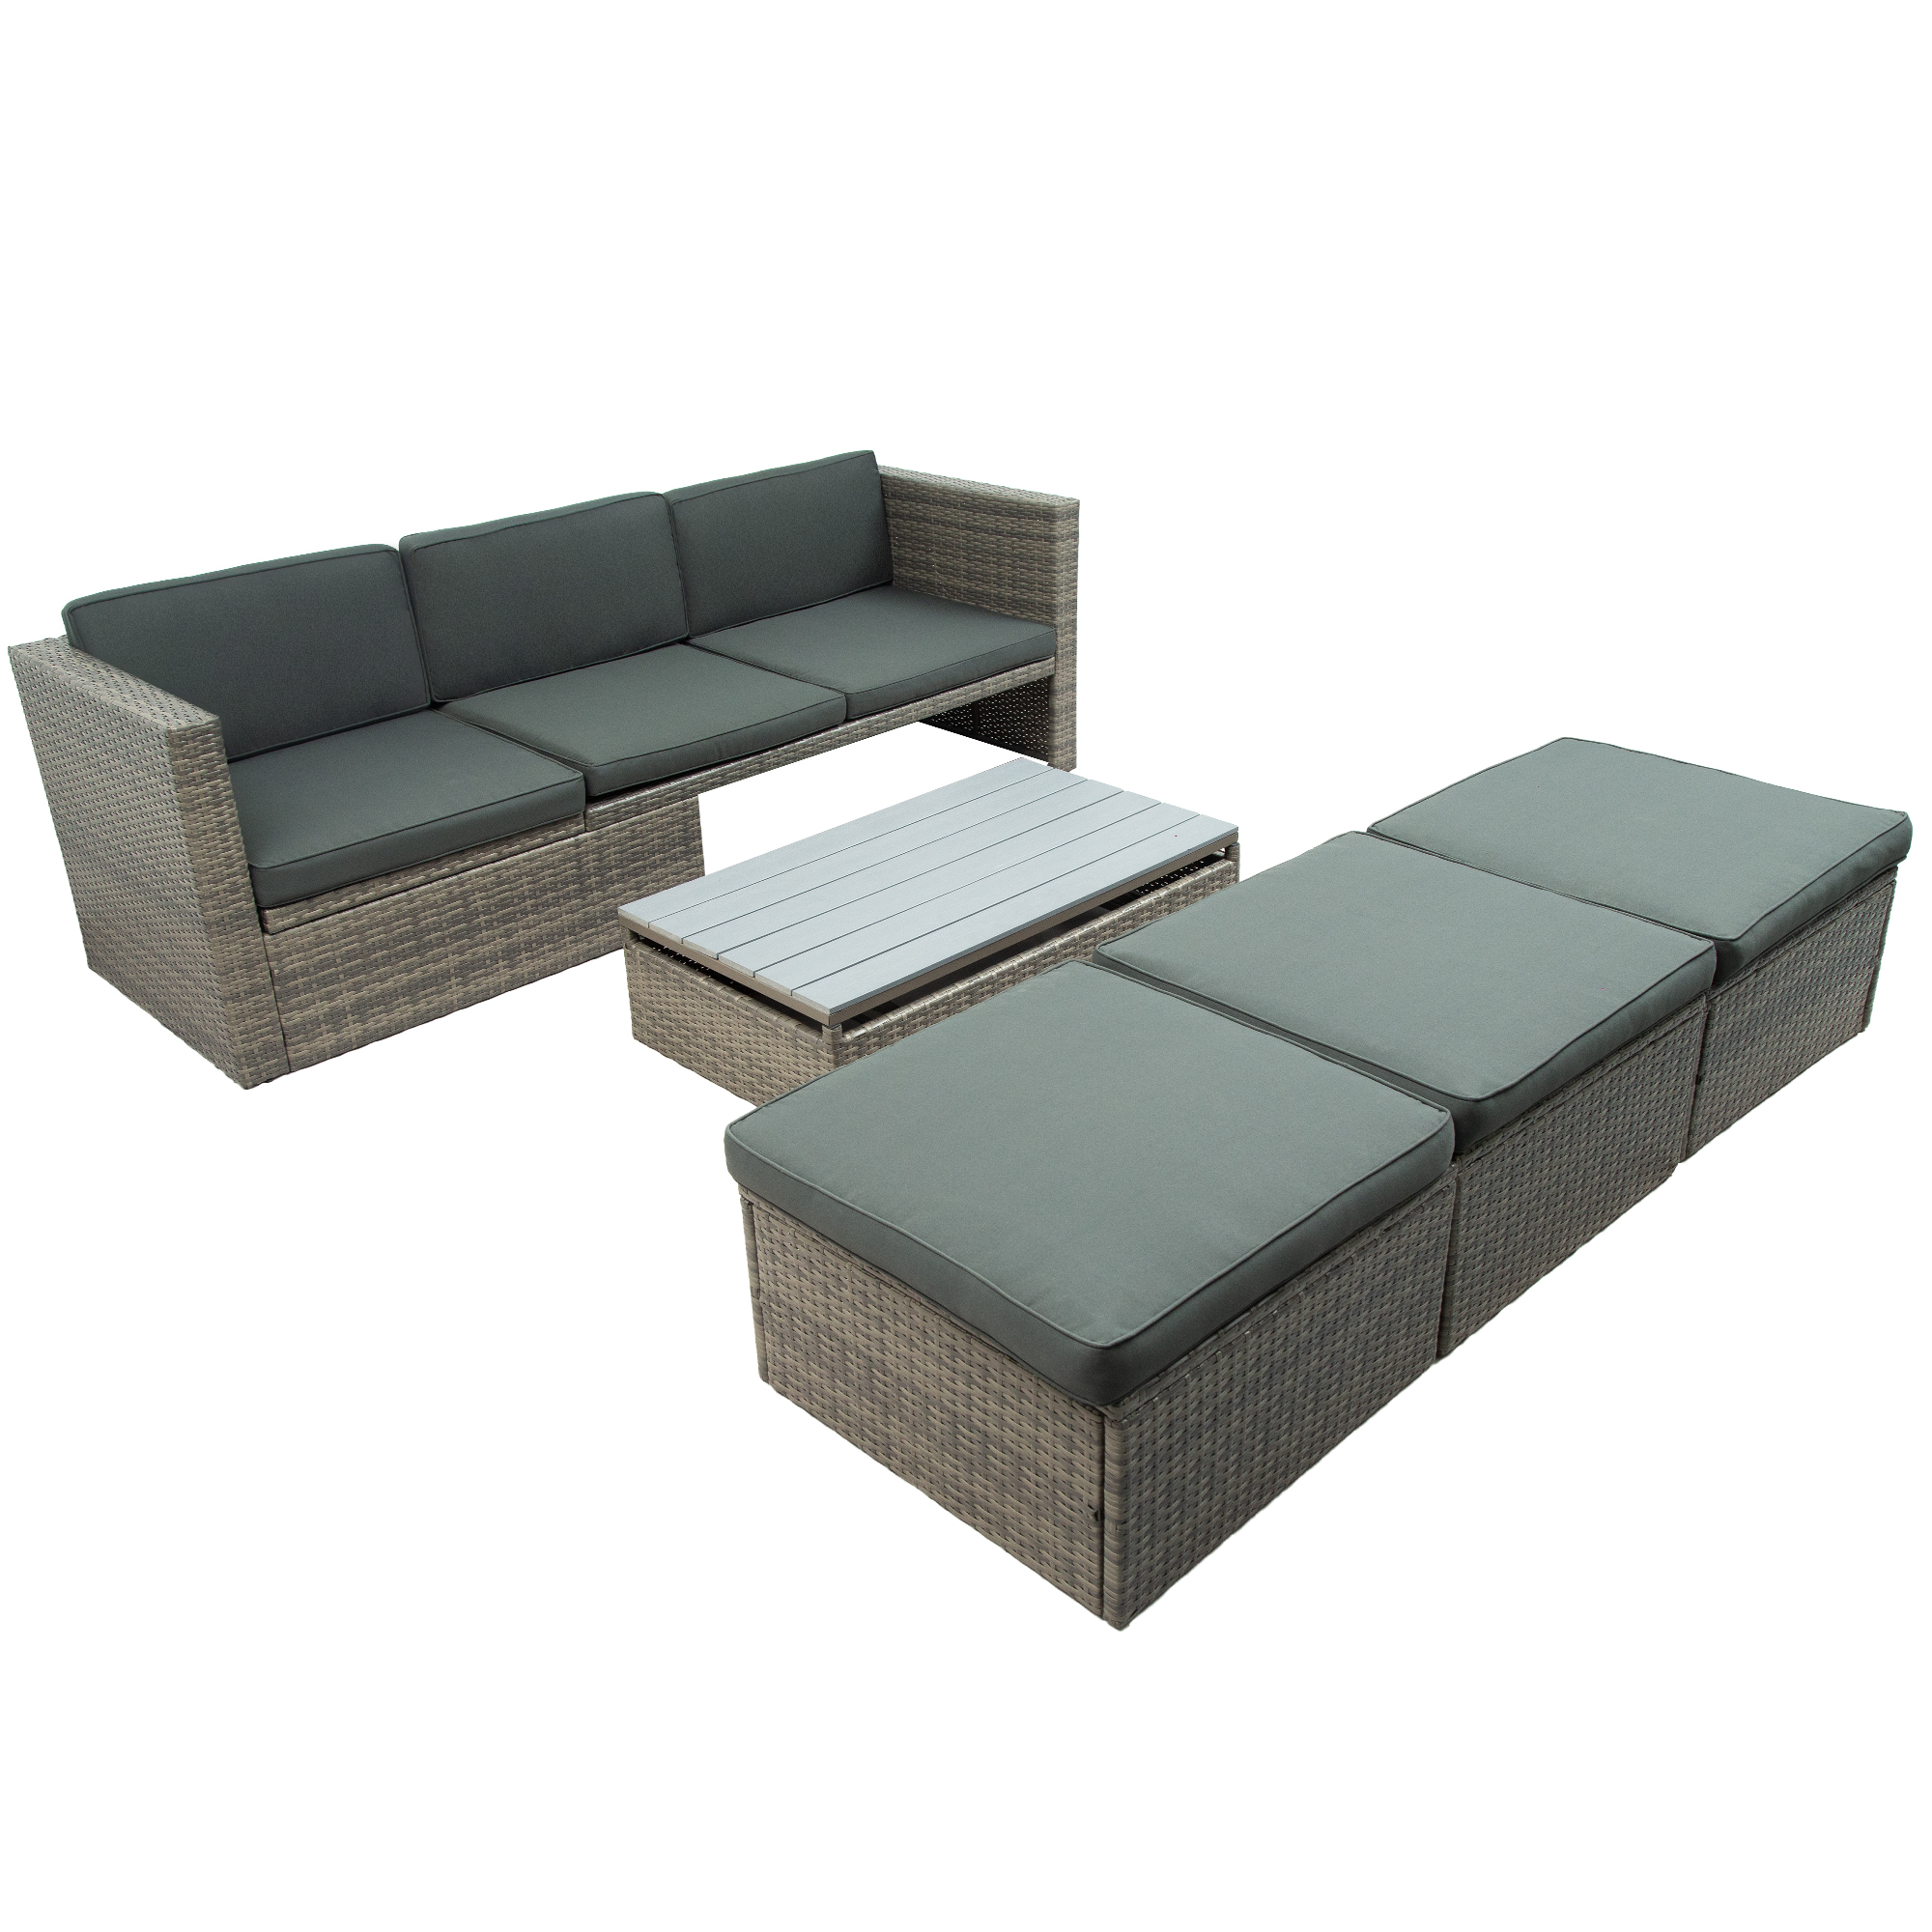 5-Piece Patio Wicker Sofa with Adustable Backrest, Cushions, Ottomans and Lift Top Coffee Table - WY000217EAA